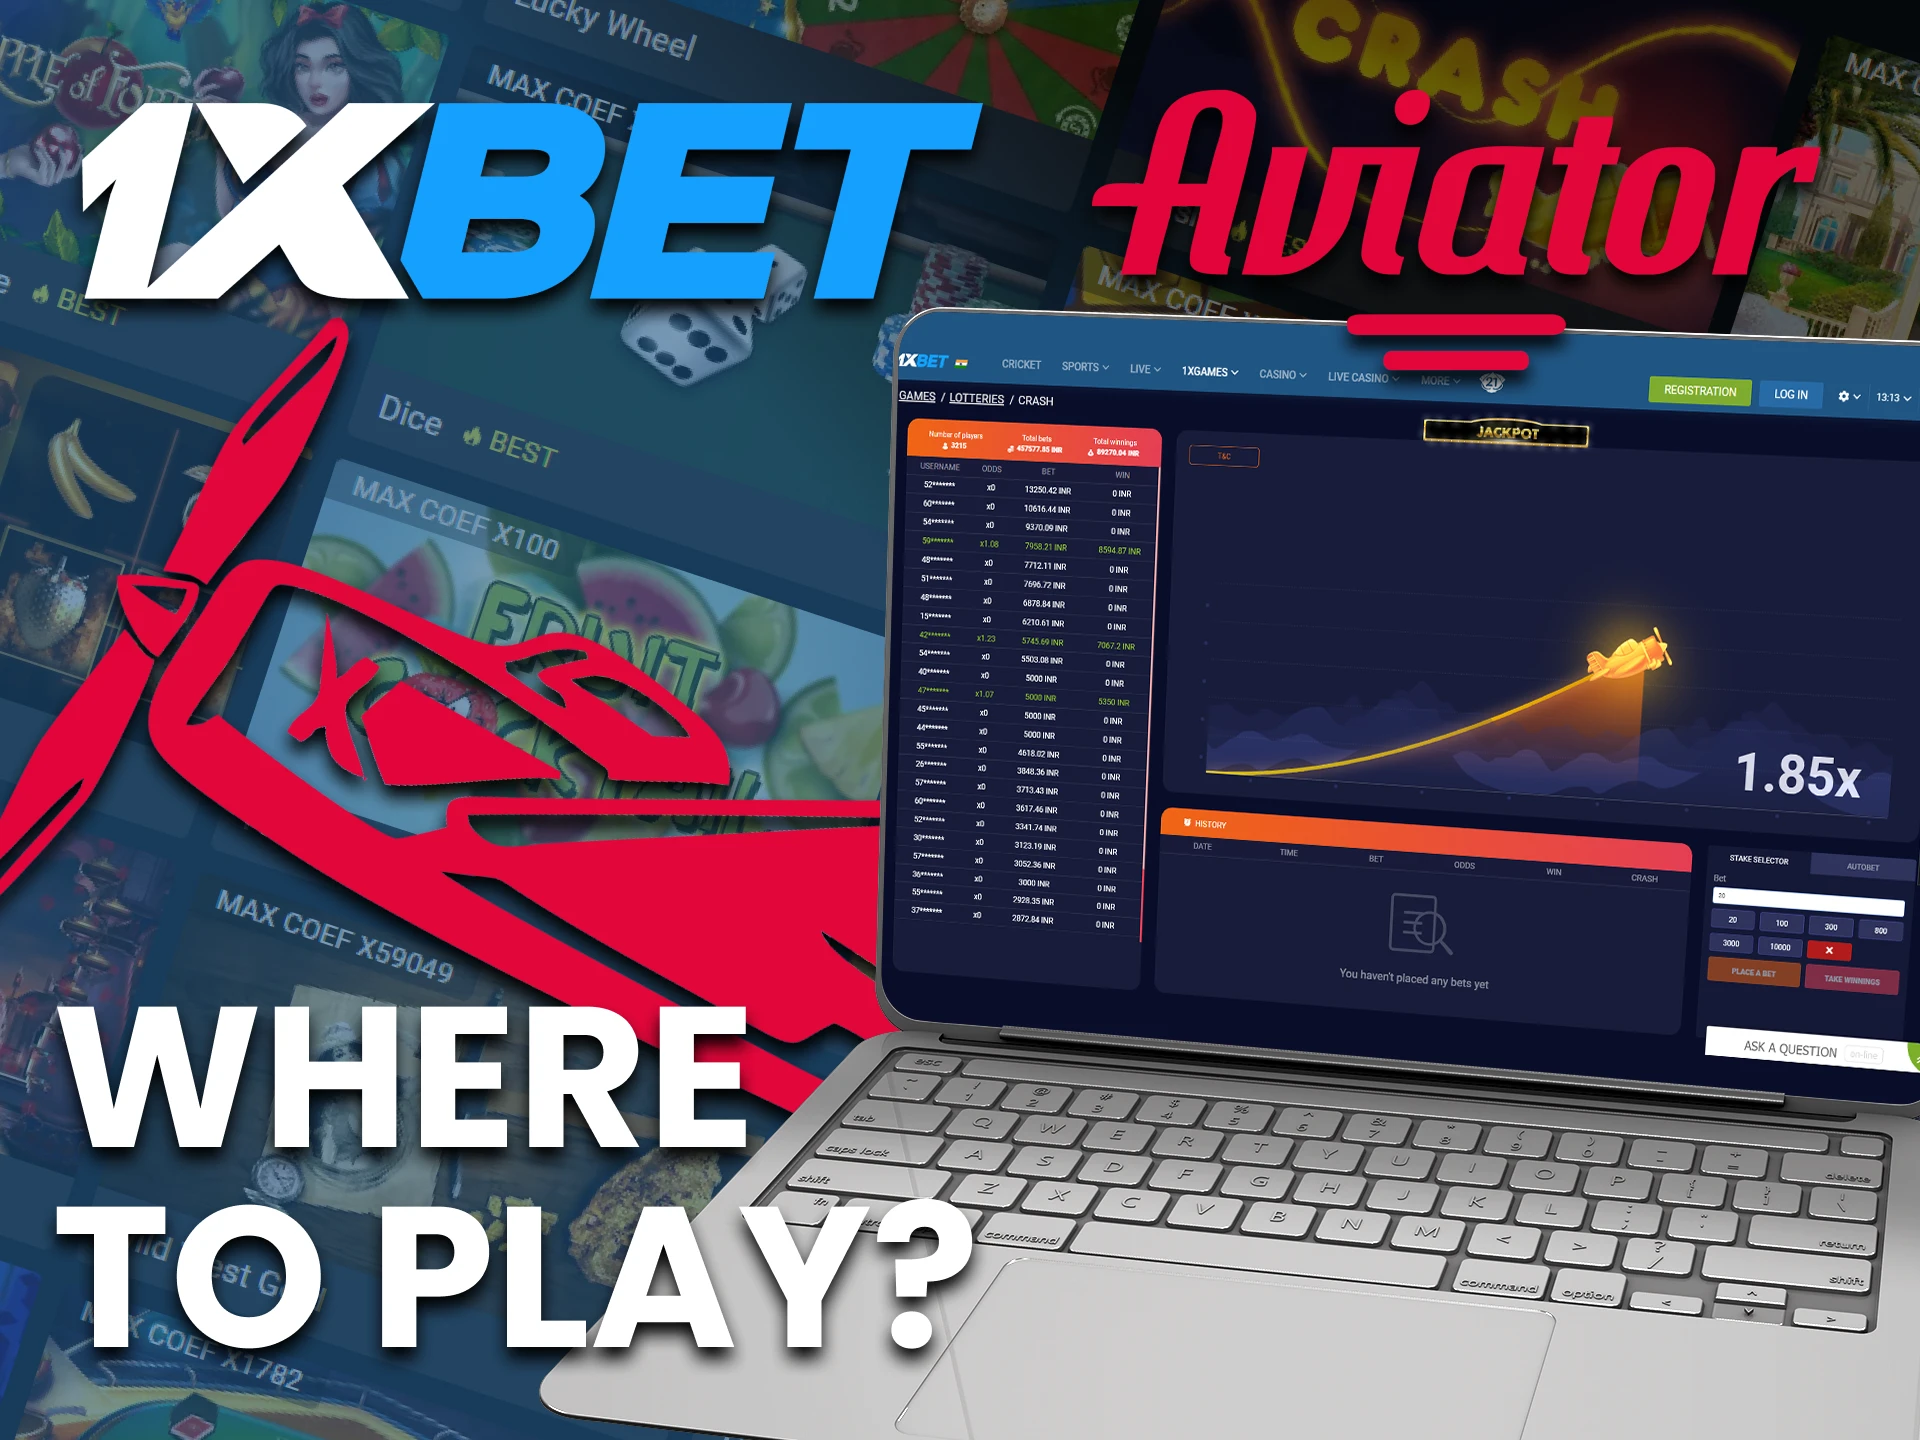 Launch the 1xbet casino to play the Aviator game.